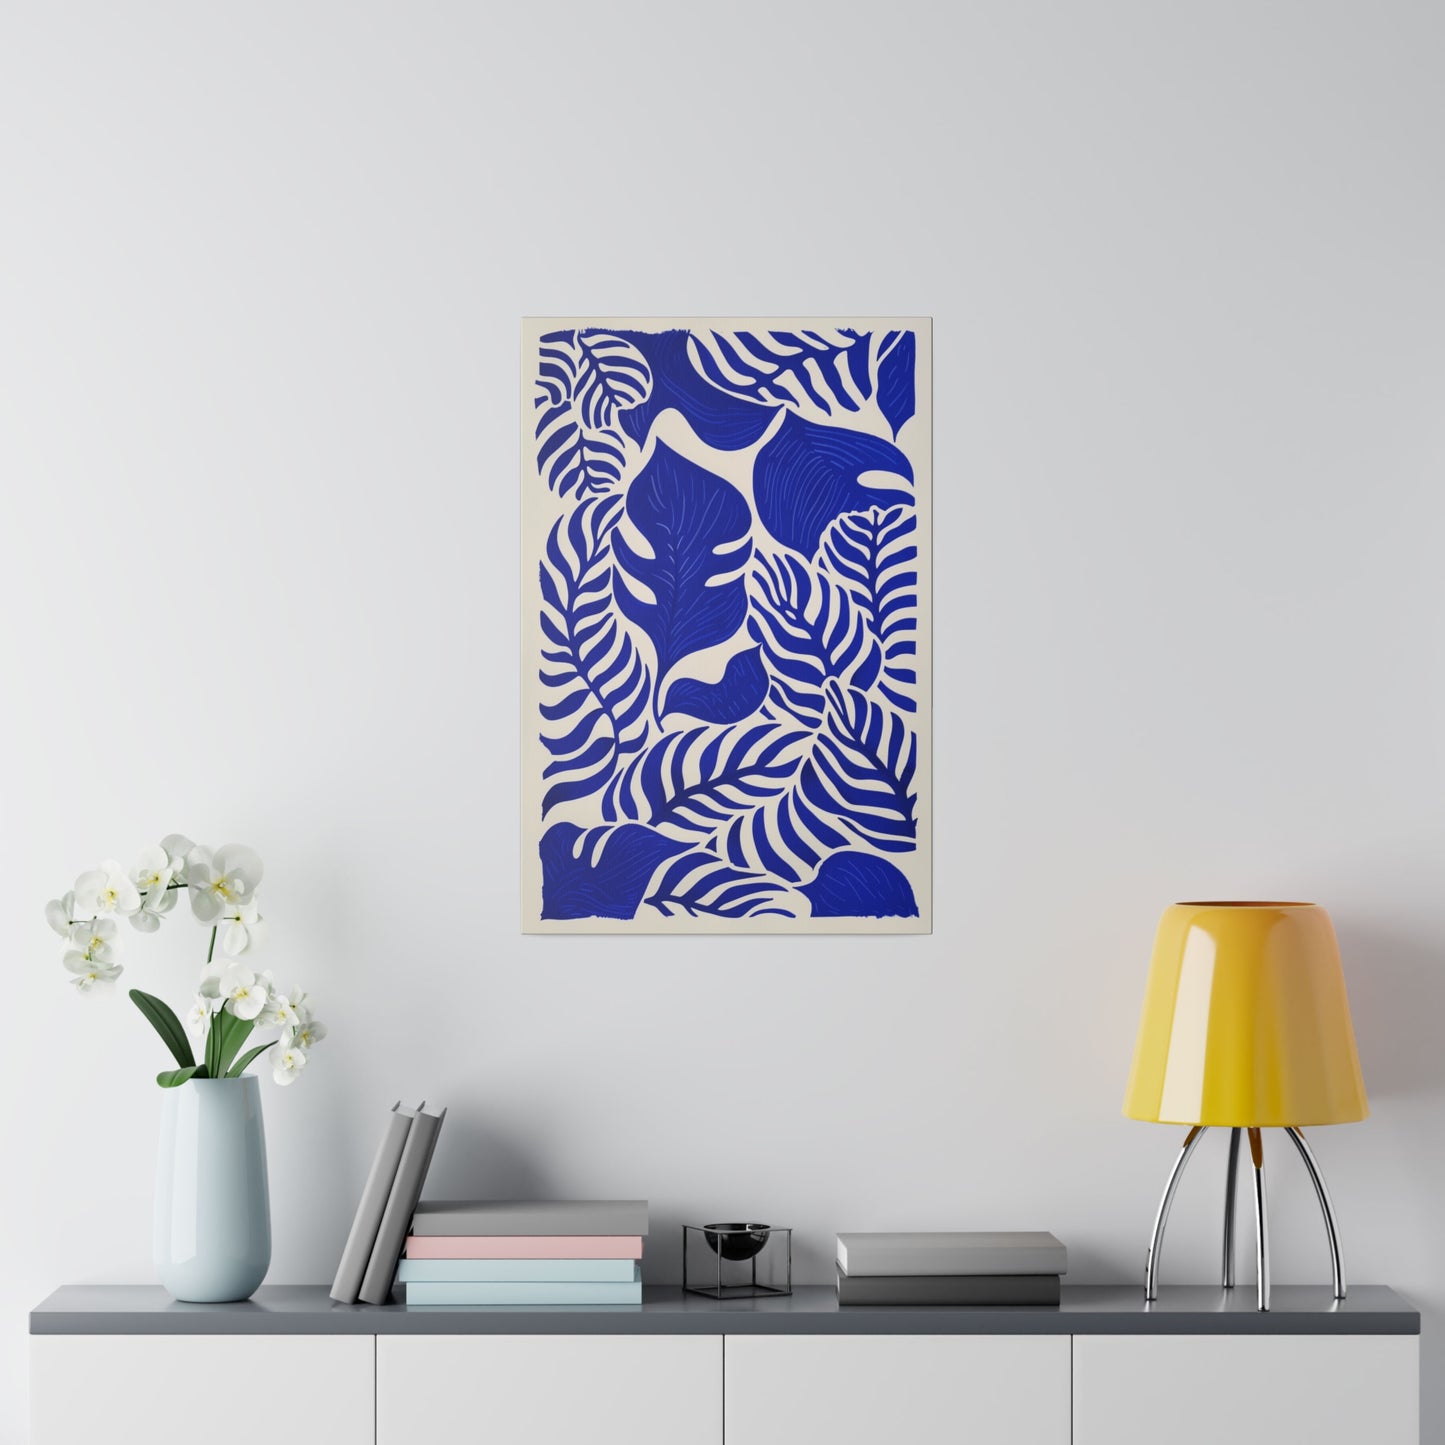 Royal Blue Abstract Canvas Art Gallery Wrap, Vines Cream Wall Print Painting Decor Small Large Hanging Modern Vertical Living Room